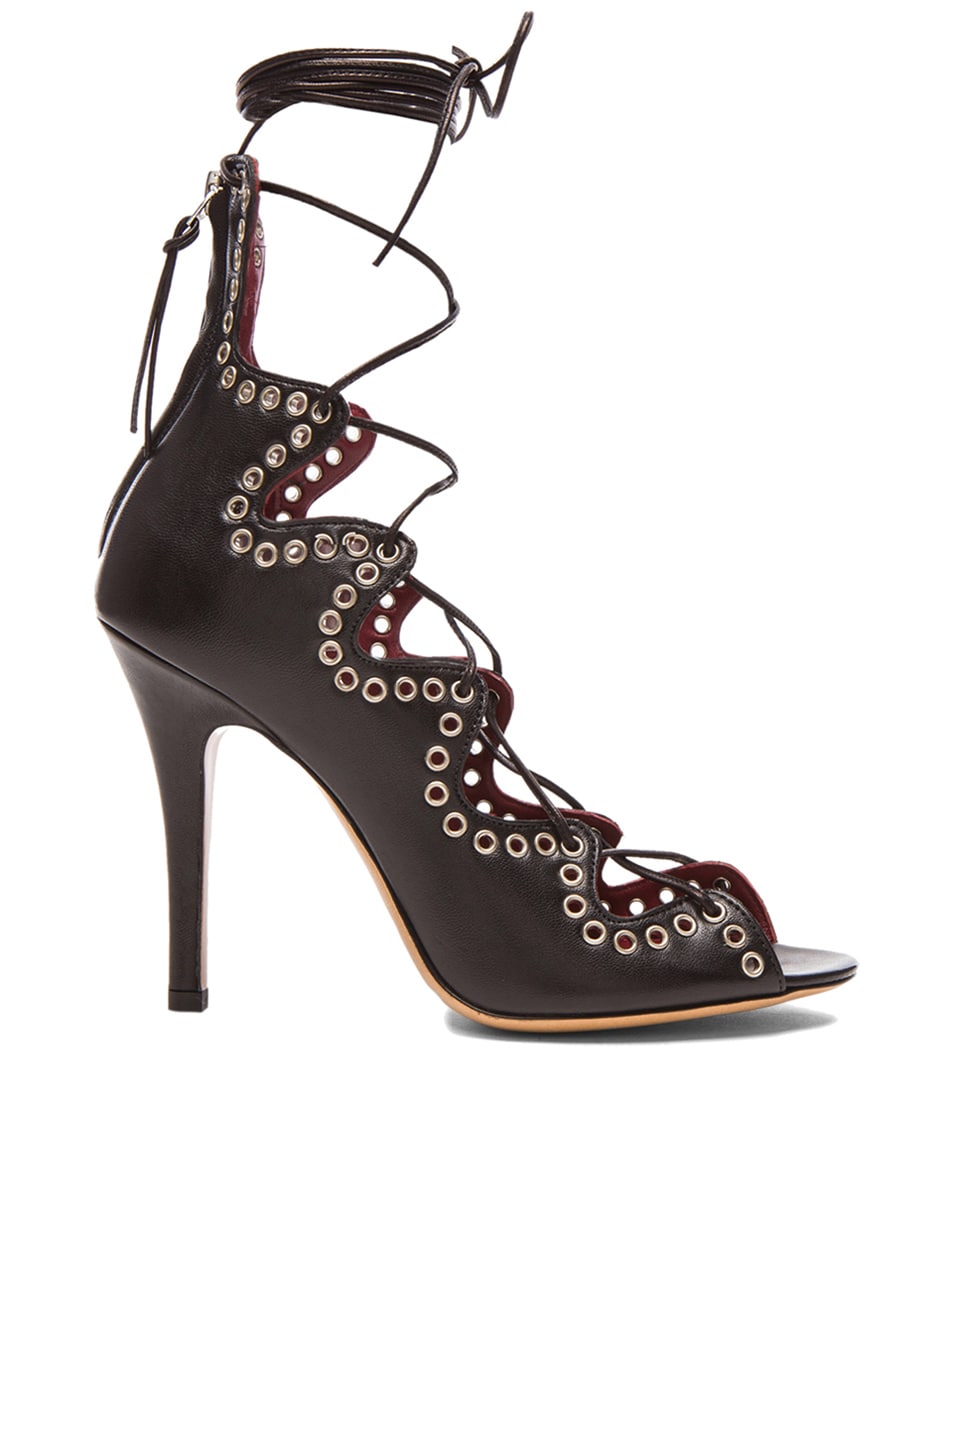 Image 1 of Isabel Marant Lelie Ghillies Leather Sandals in Black